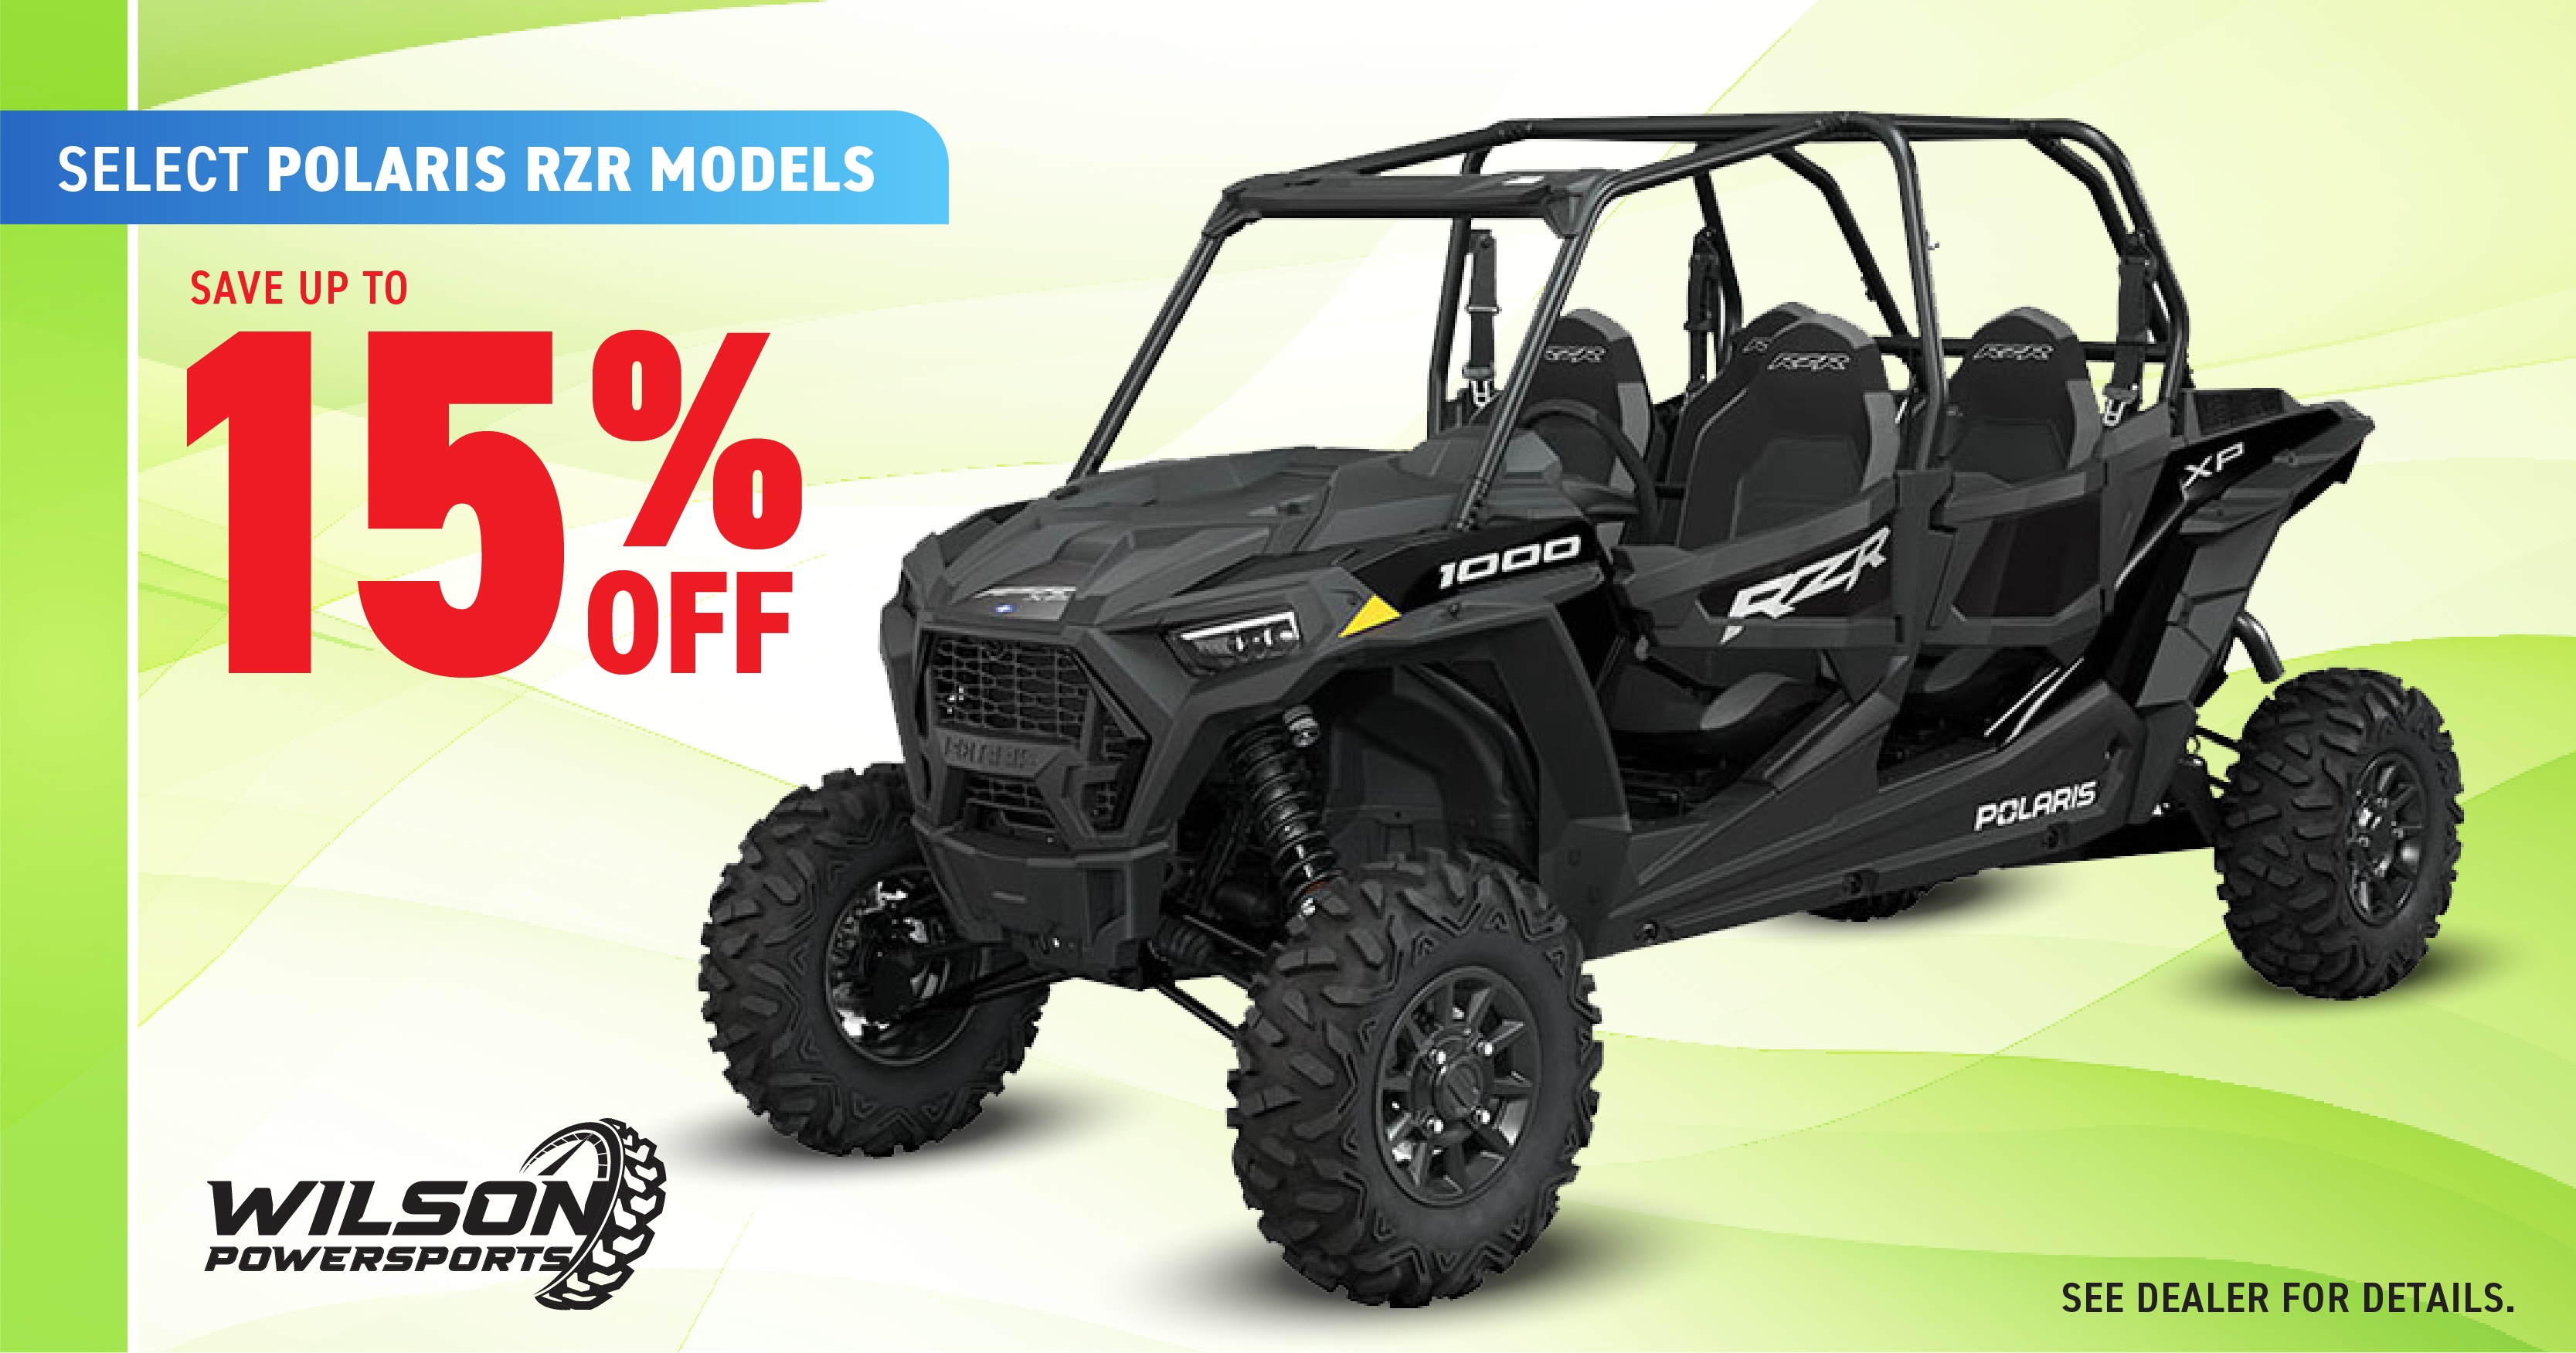 UP to 15% off select Polaris RZR models